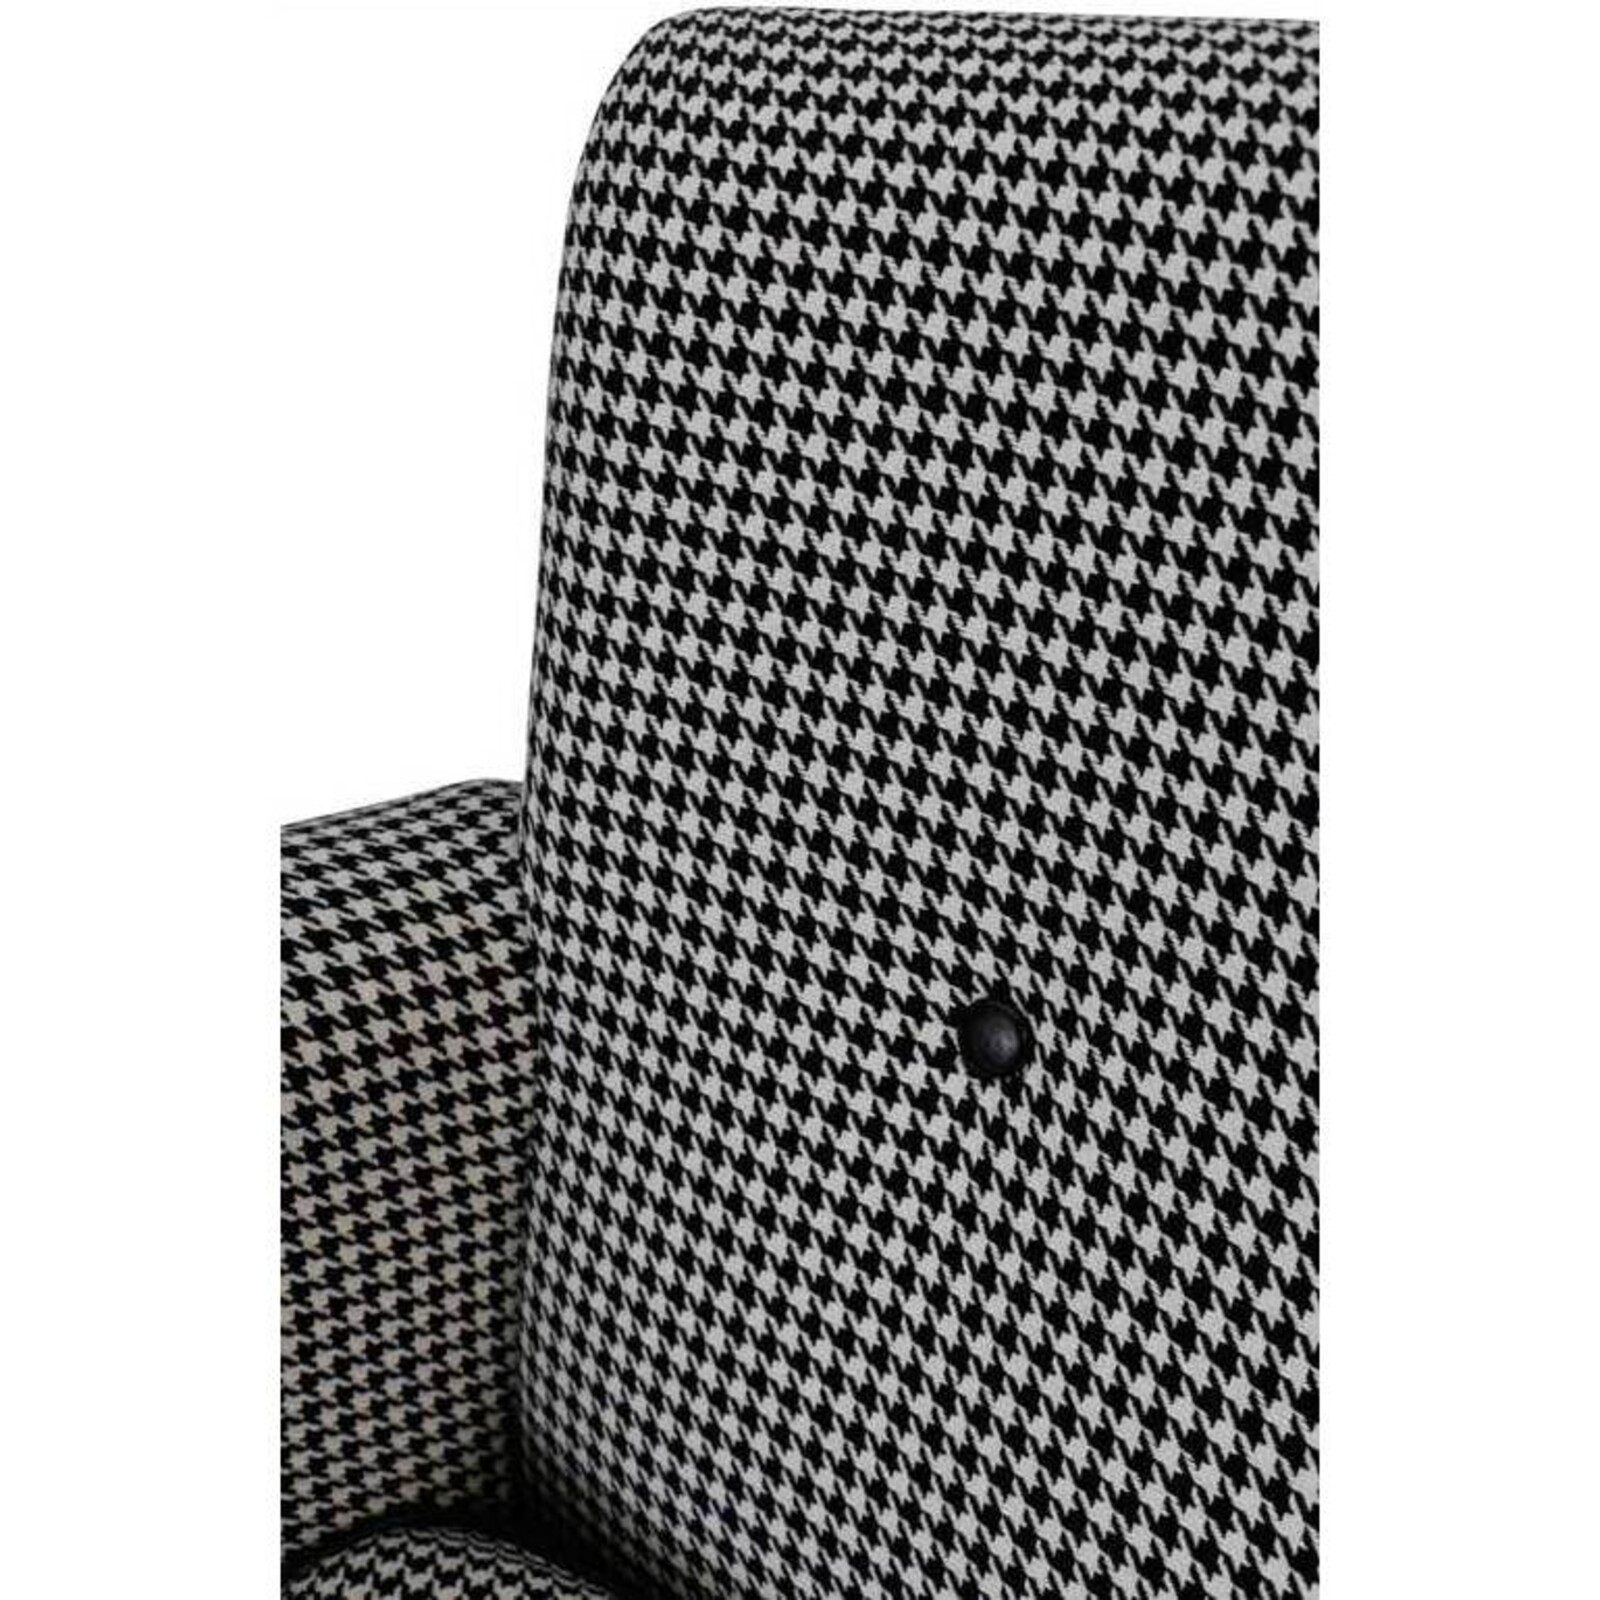 Chair Houndstooth Black